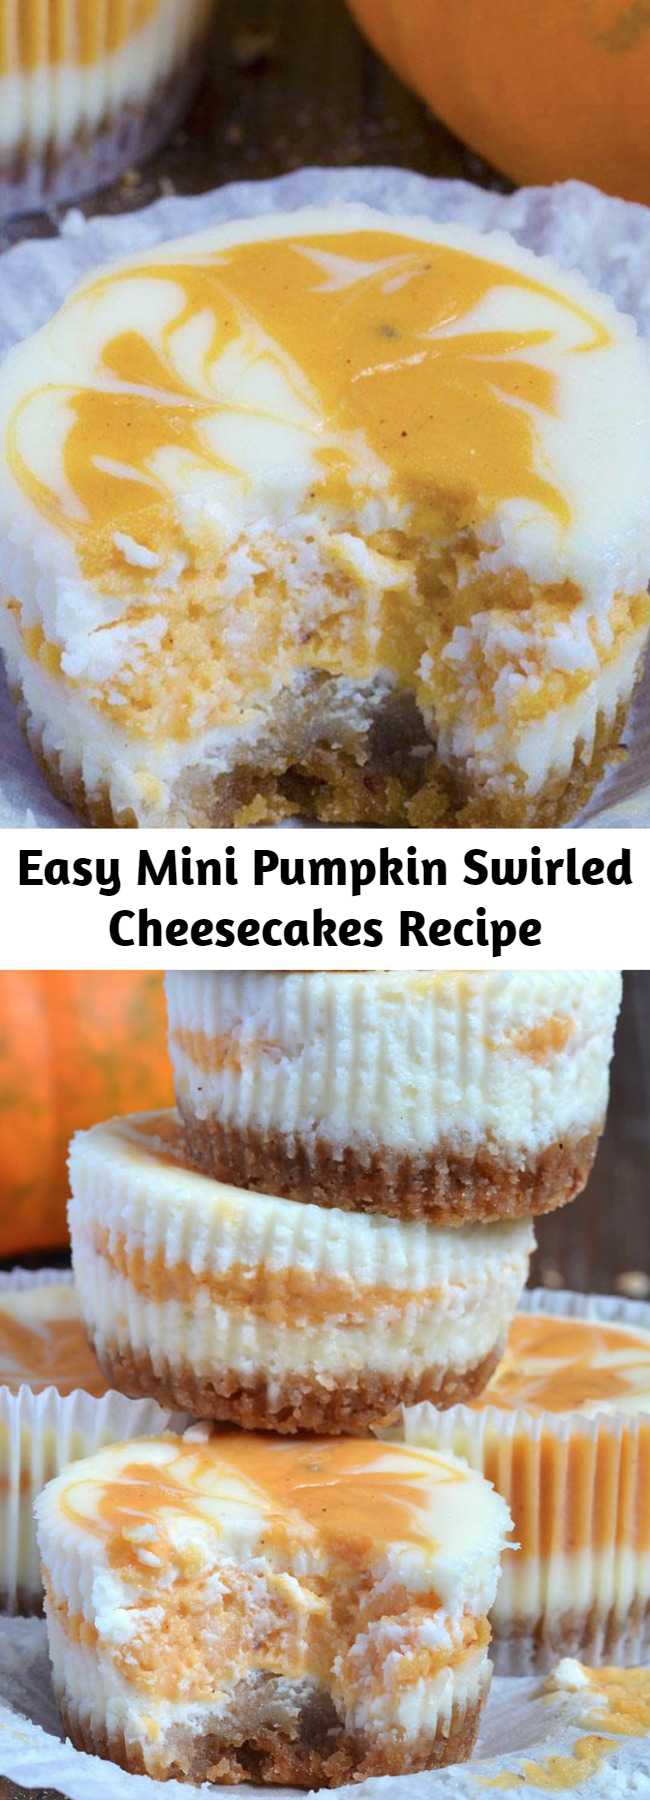 Easy Mini Pumpkin Swirled Cheesecakes Recipe - I always adore sweet cheesecake bites but with pumpkin I got more than I expect! These gorgeous Mini Pumpkin Swirled Cheesecakes are the best homemade treat to satisfy your fall flavor cravings. Perfectly swirled and spiced for a delicious pumpkin dessert!